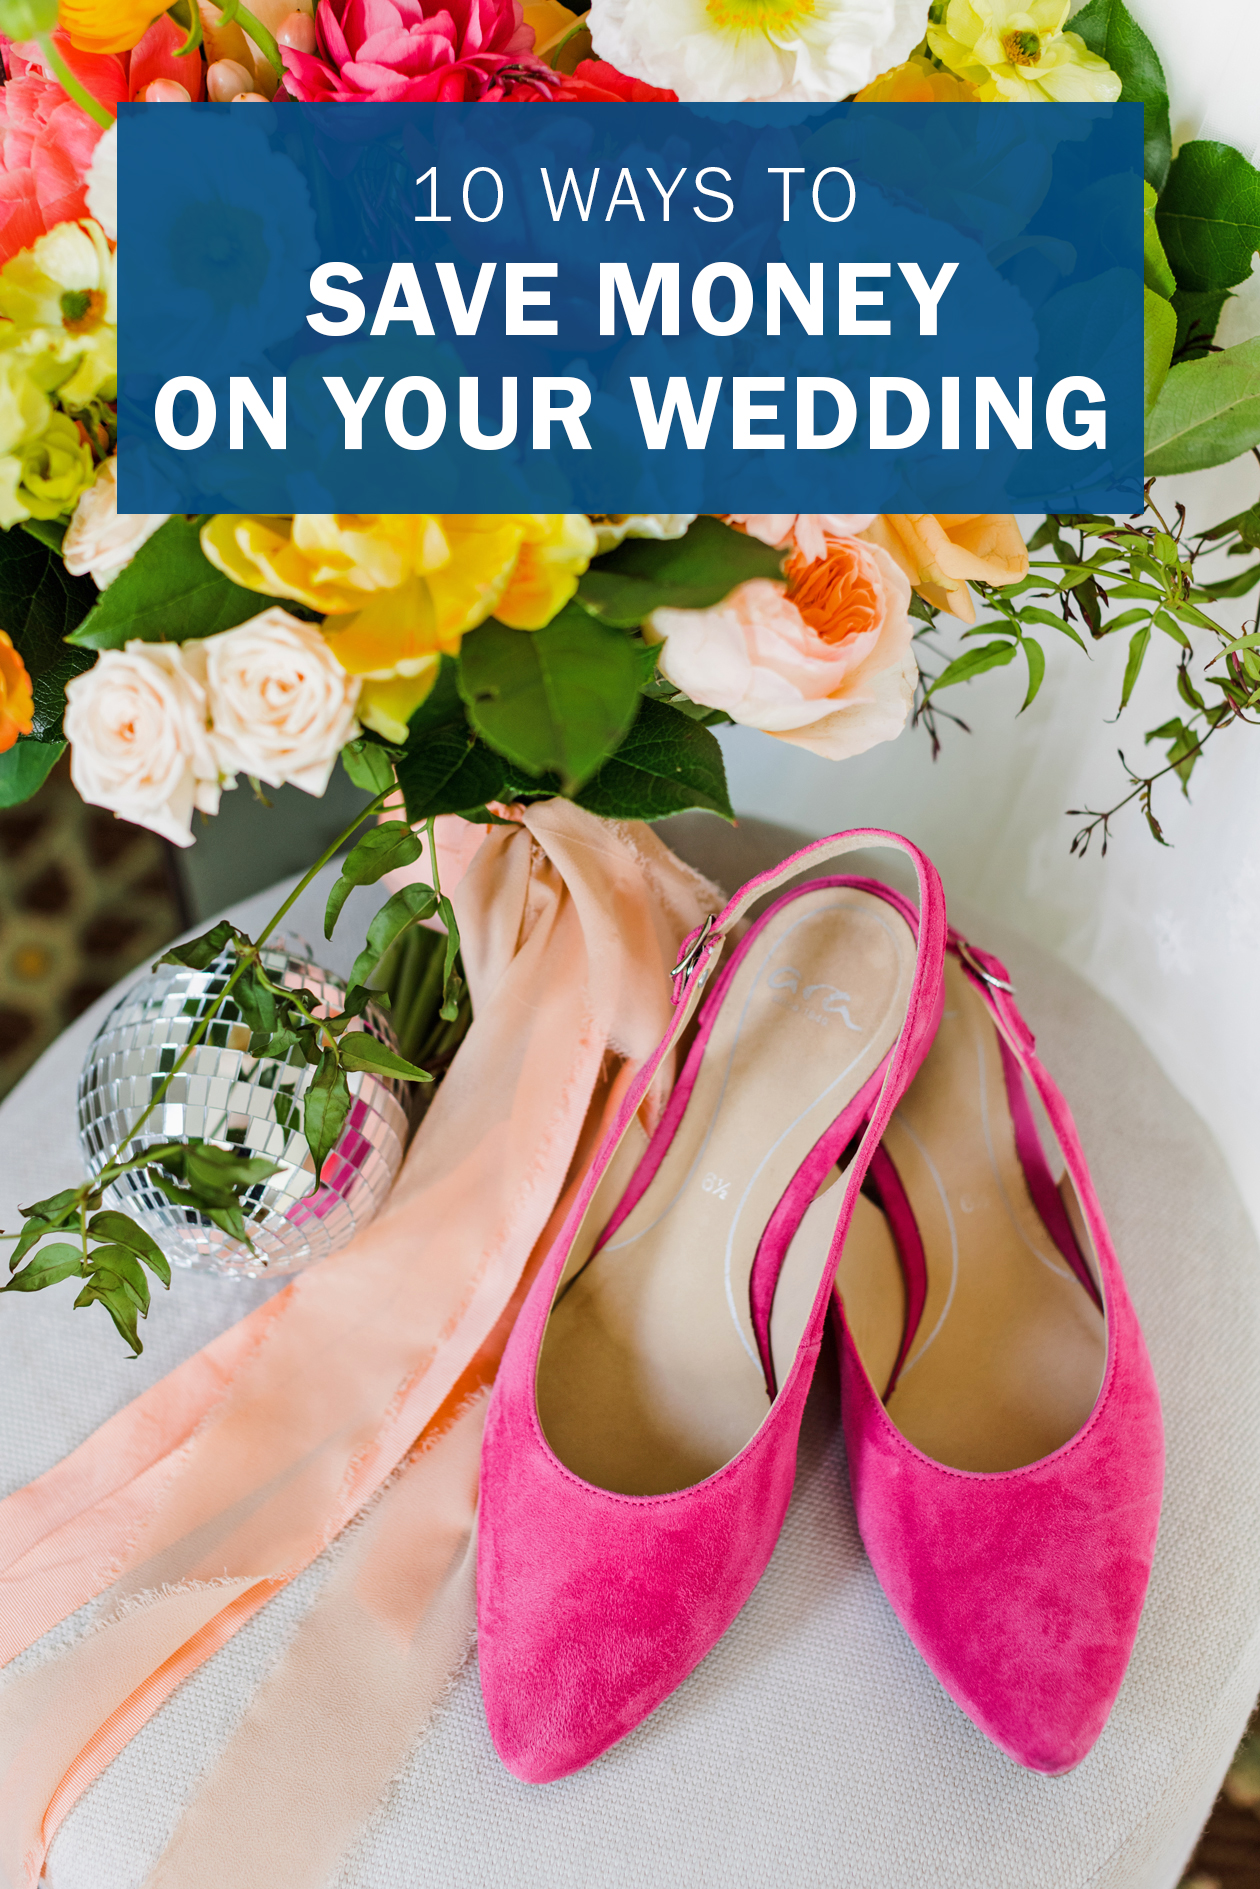 Whether you're having a small or large wedding, these 10 Ways to Save Money on Your Wedding are must-follow tips for any budget bride!